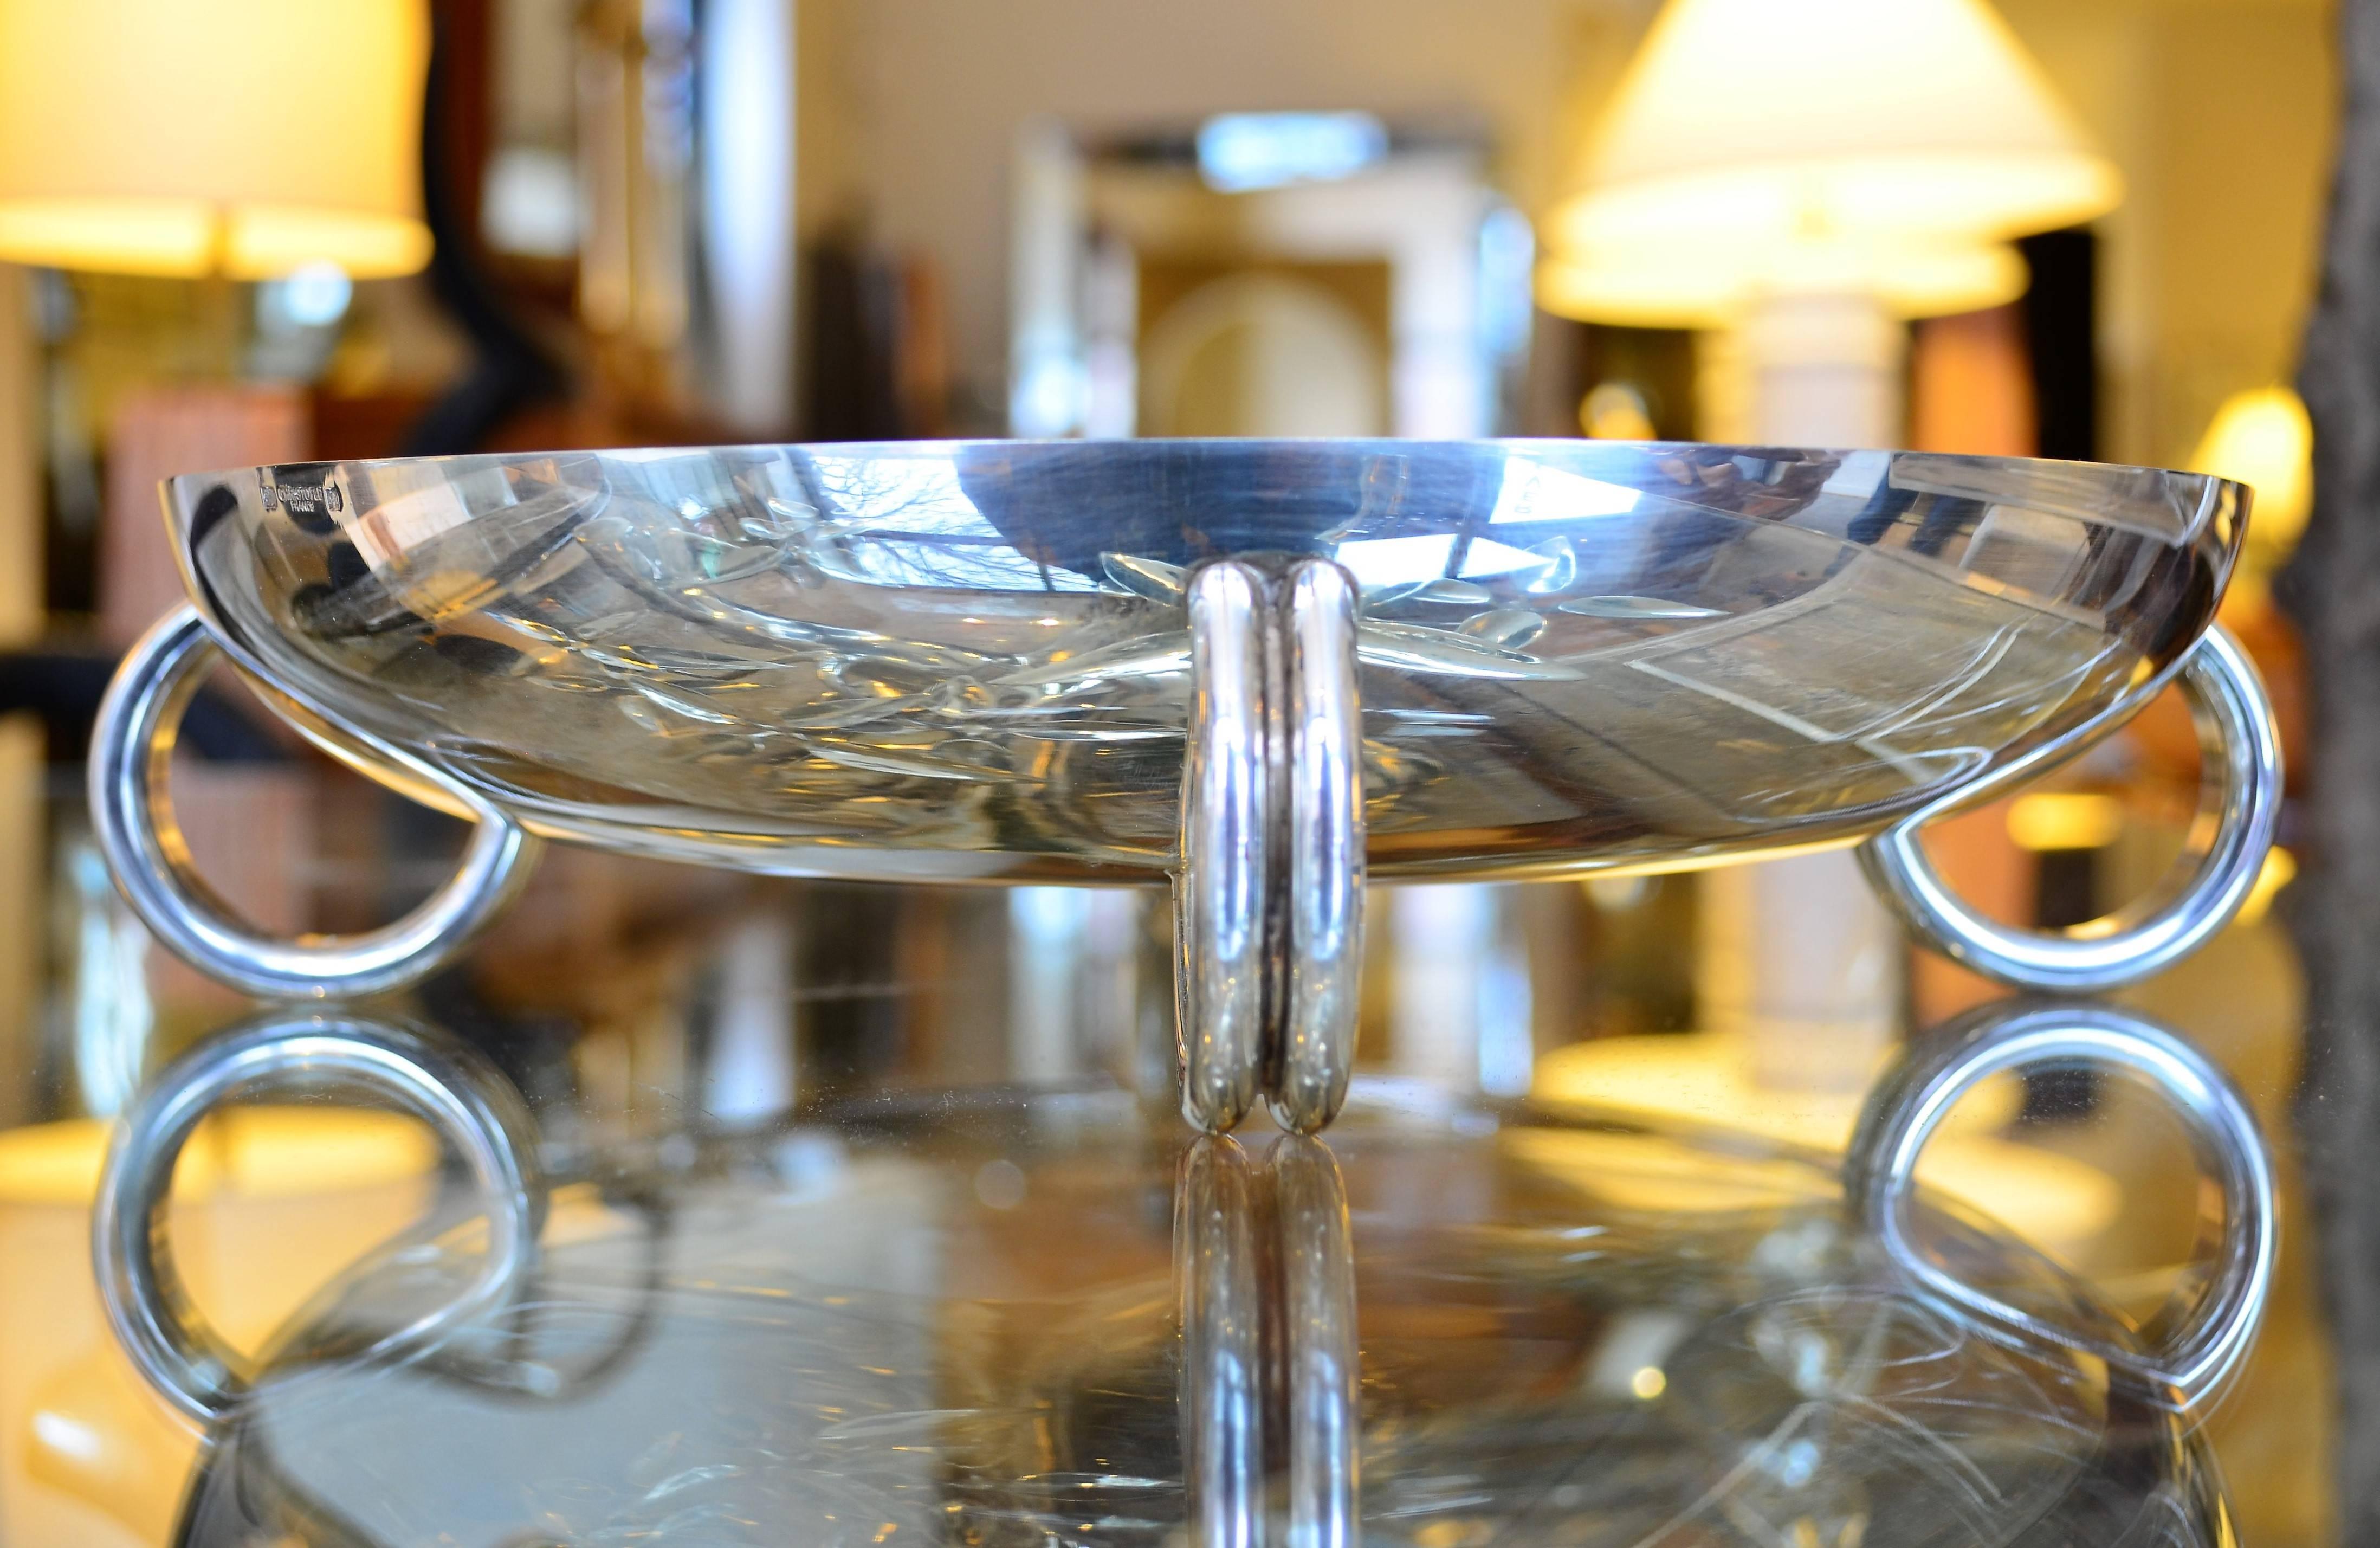 An elegant hallmarked art deco French silver plate centrepiece or serving bowl by Christofle. The large bowl rests on four rings and has two concentric circles in the centre of the bowl. Fantastic Art Deco inspired decorative tabletop object.